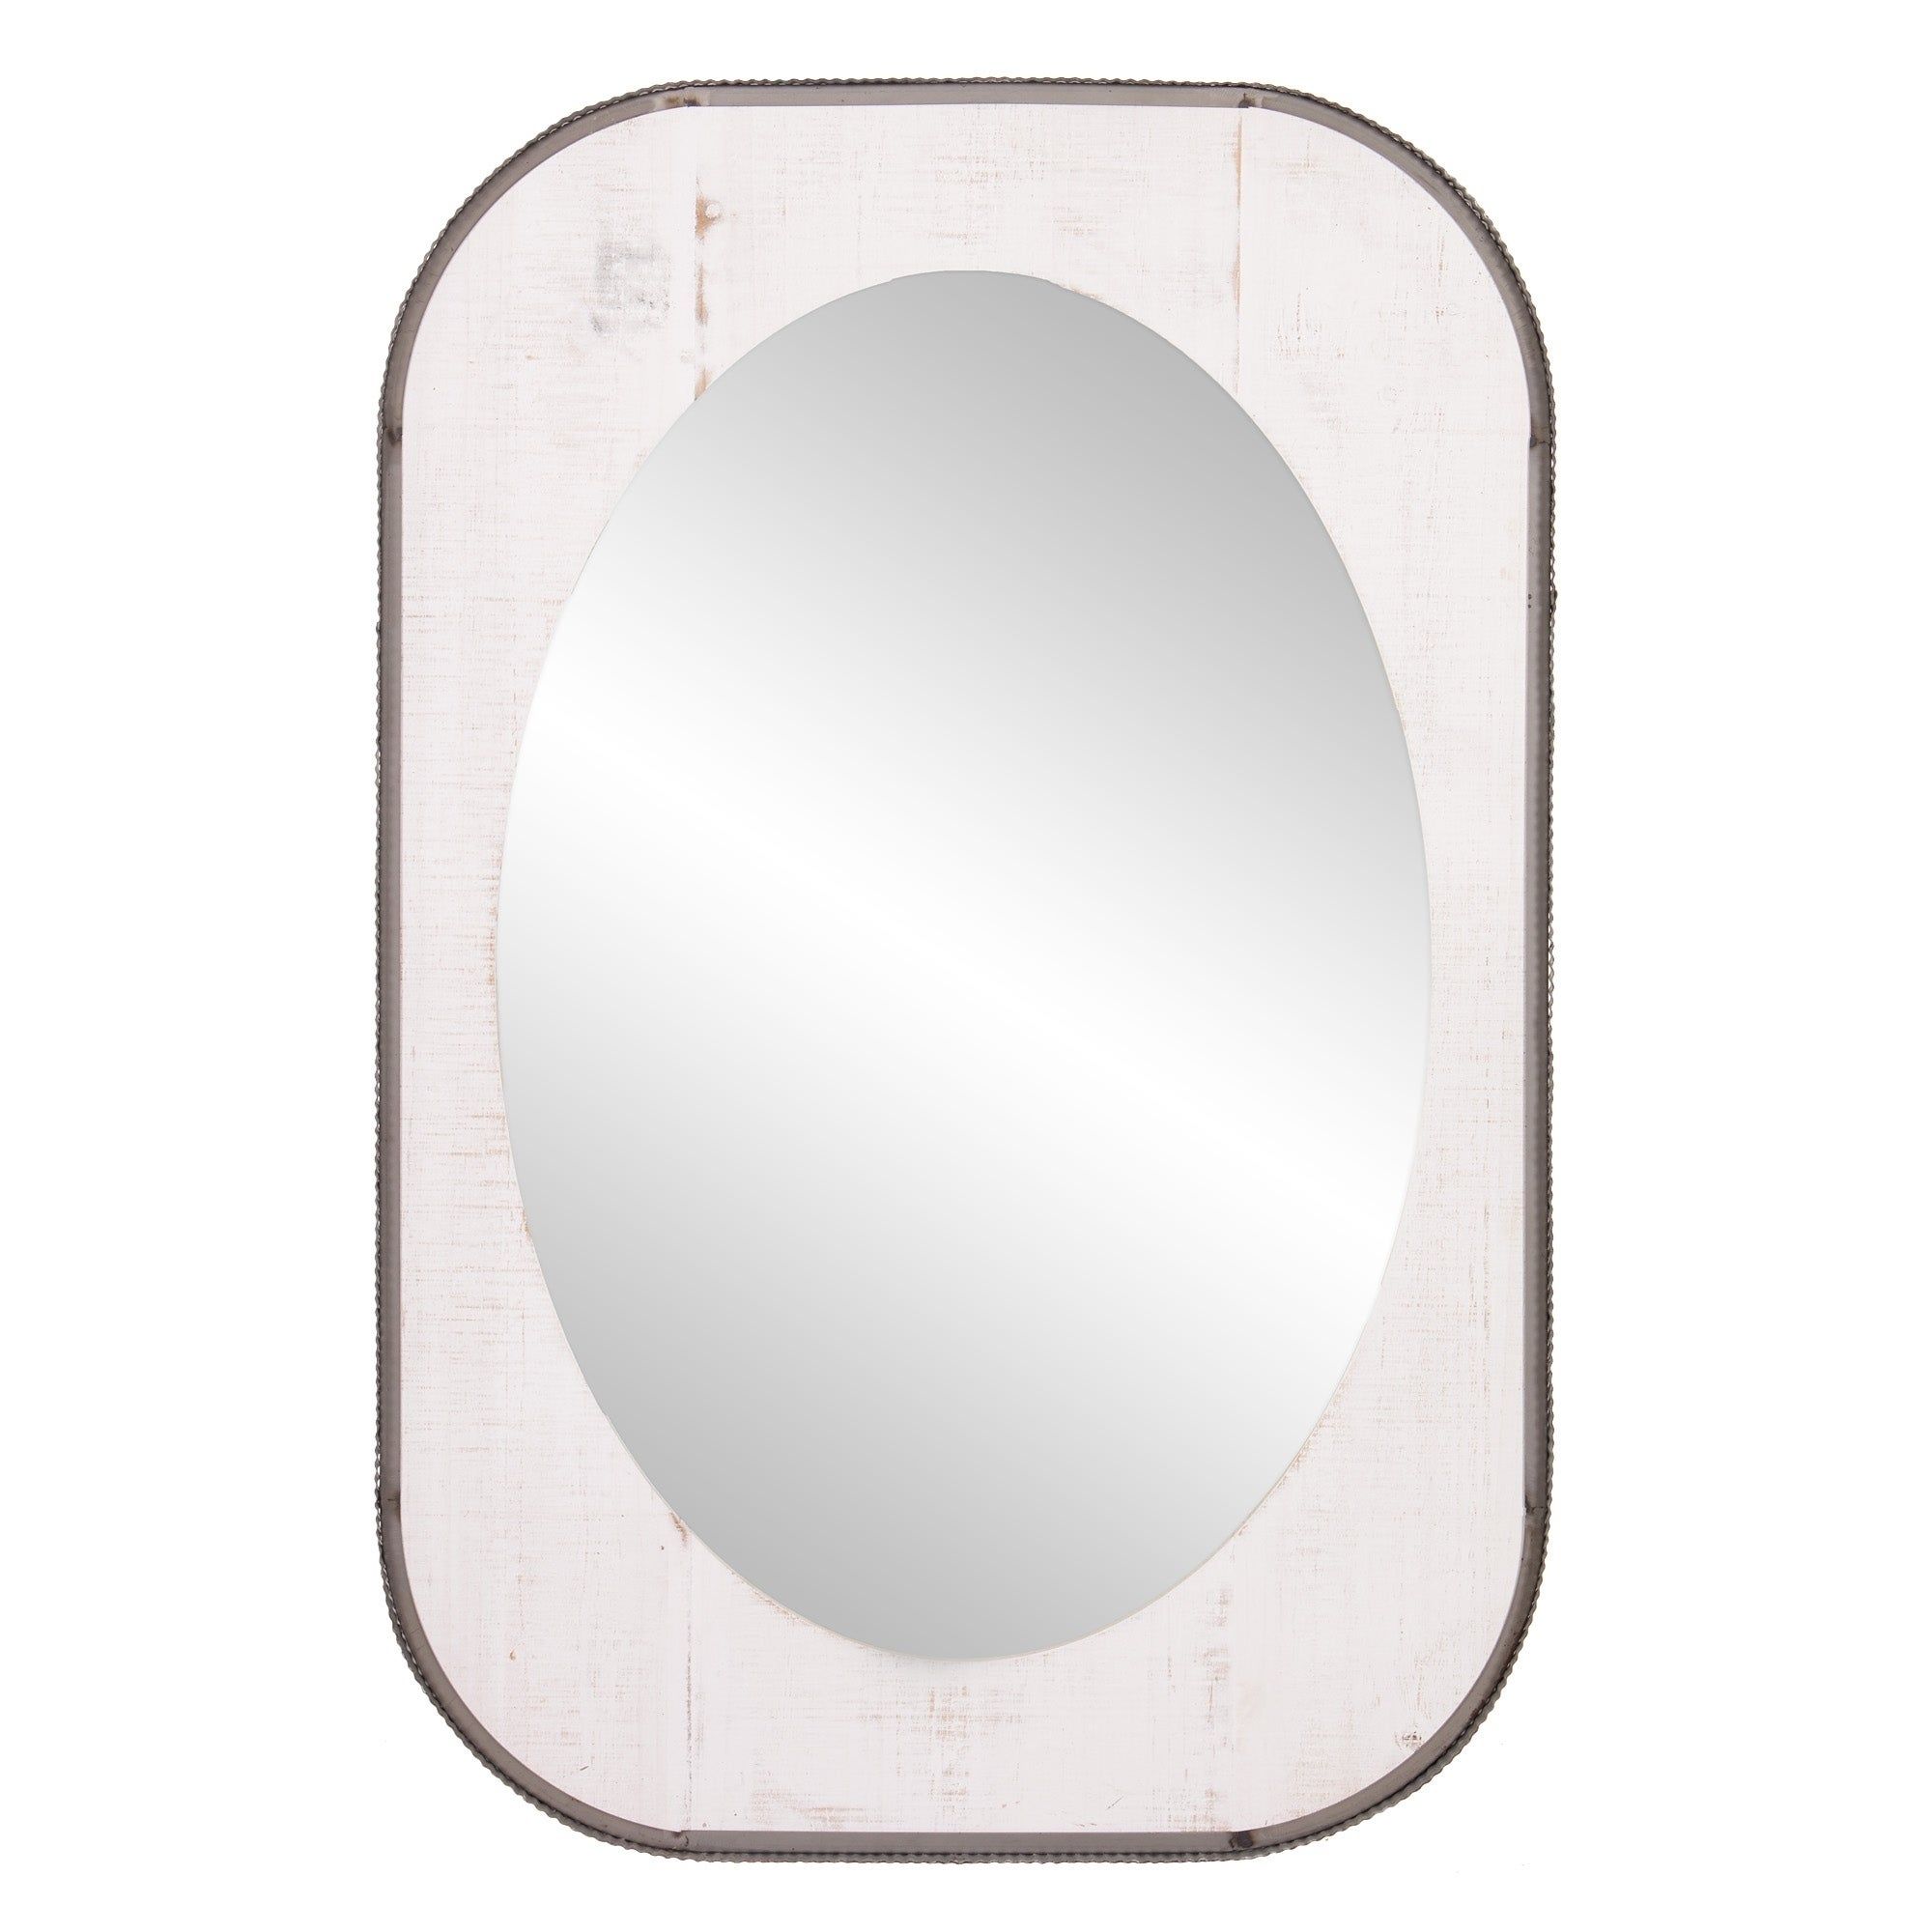 Patton Wall Decor 24X36 Oval Wood And Metal Wall Accent Mirror Intended For Rectangle Antique Galvanized Metal Accent Mirrors (View 15 of 20)